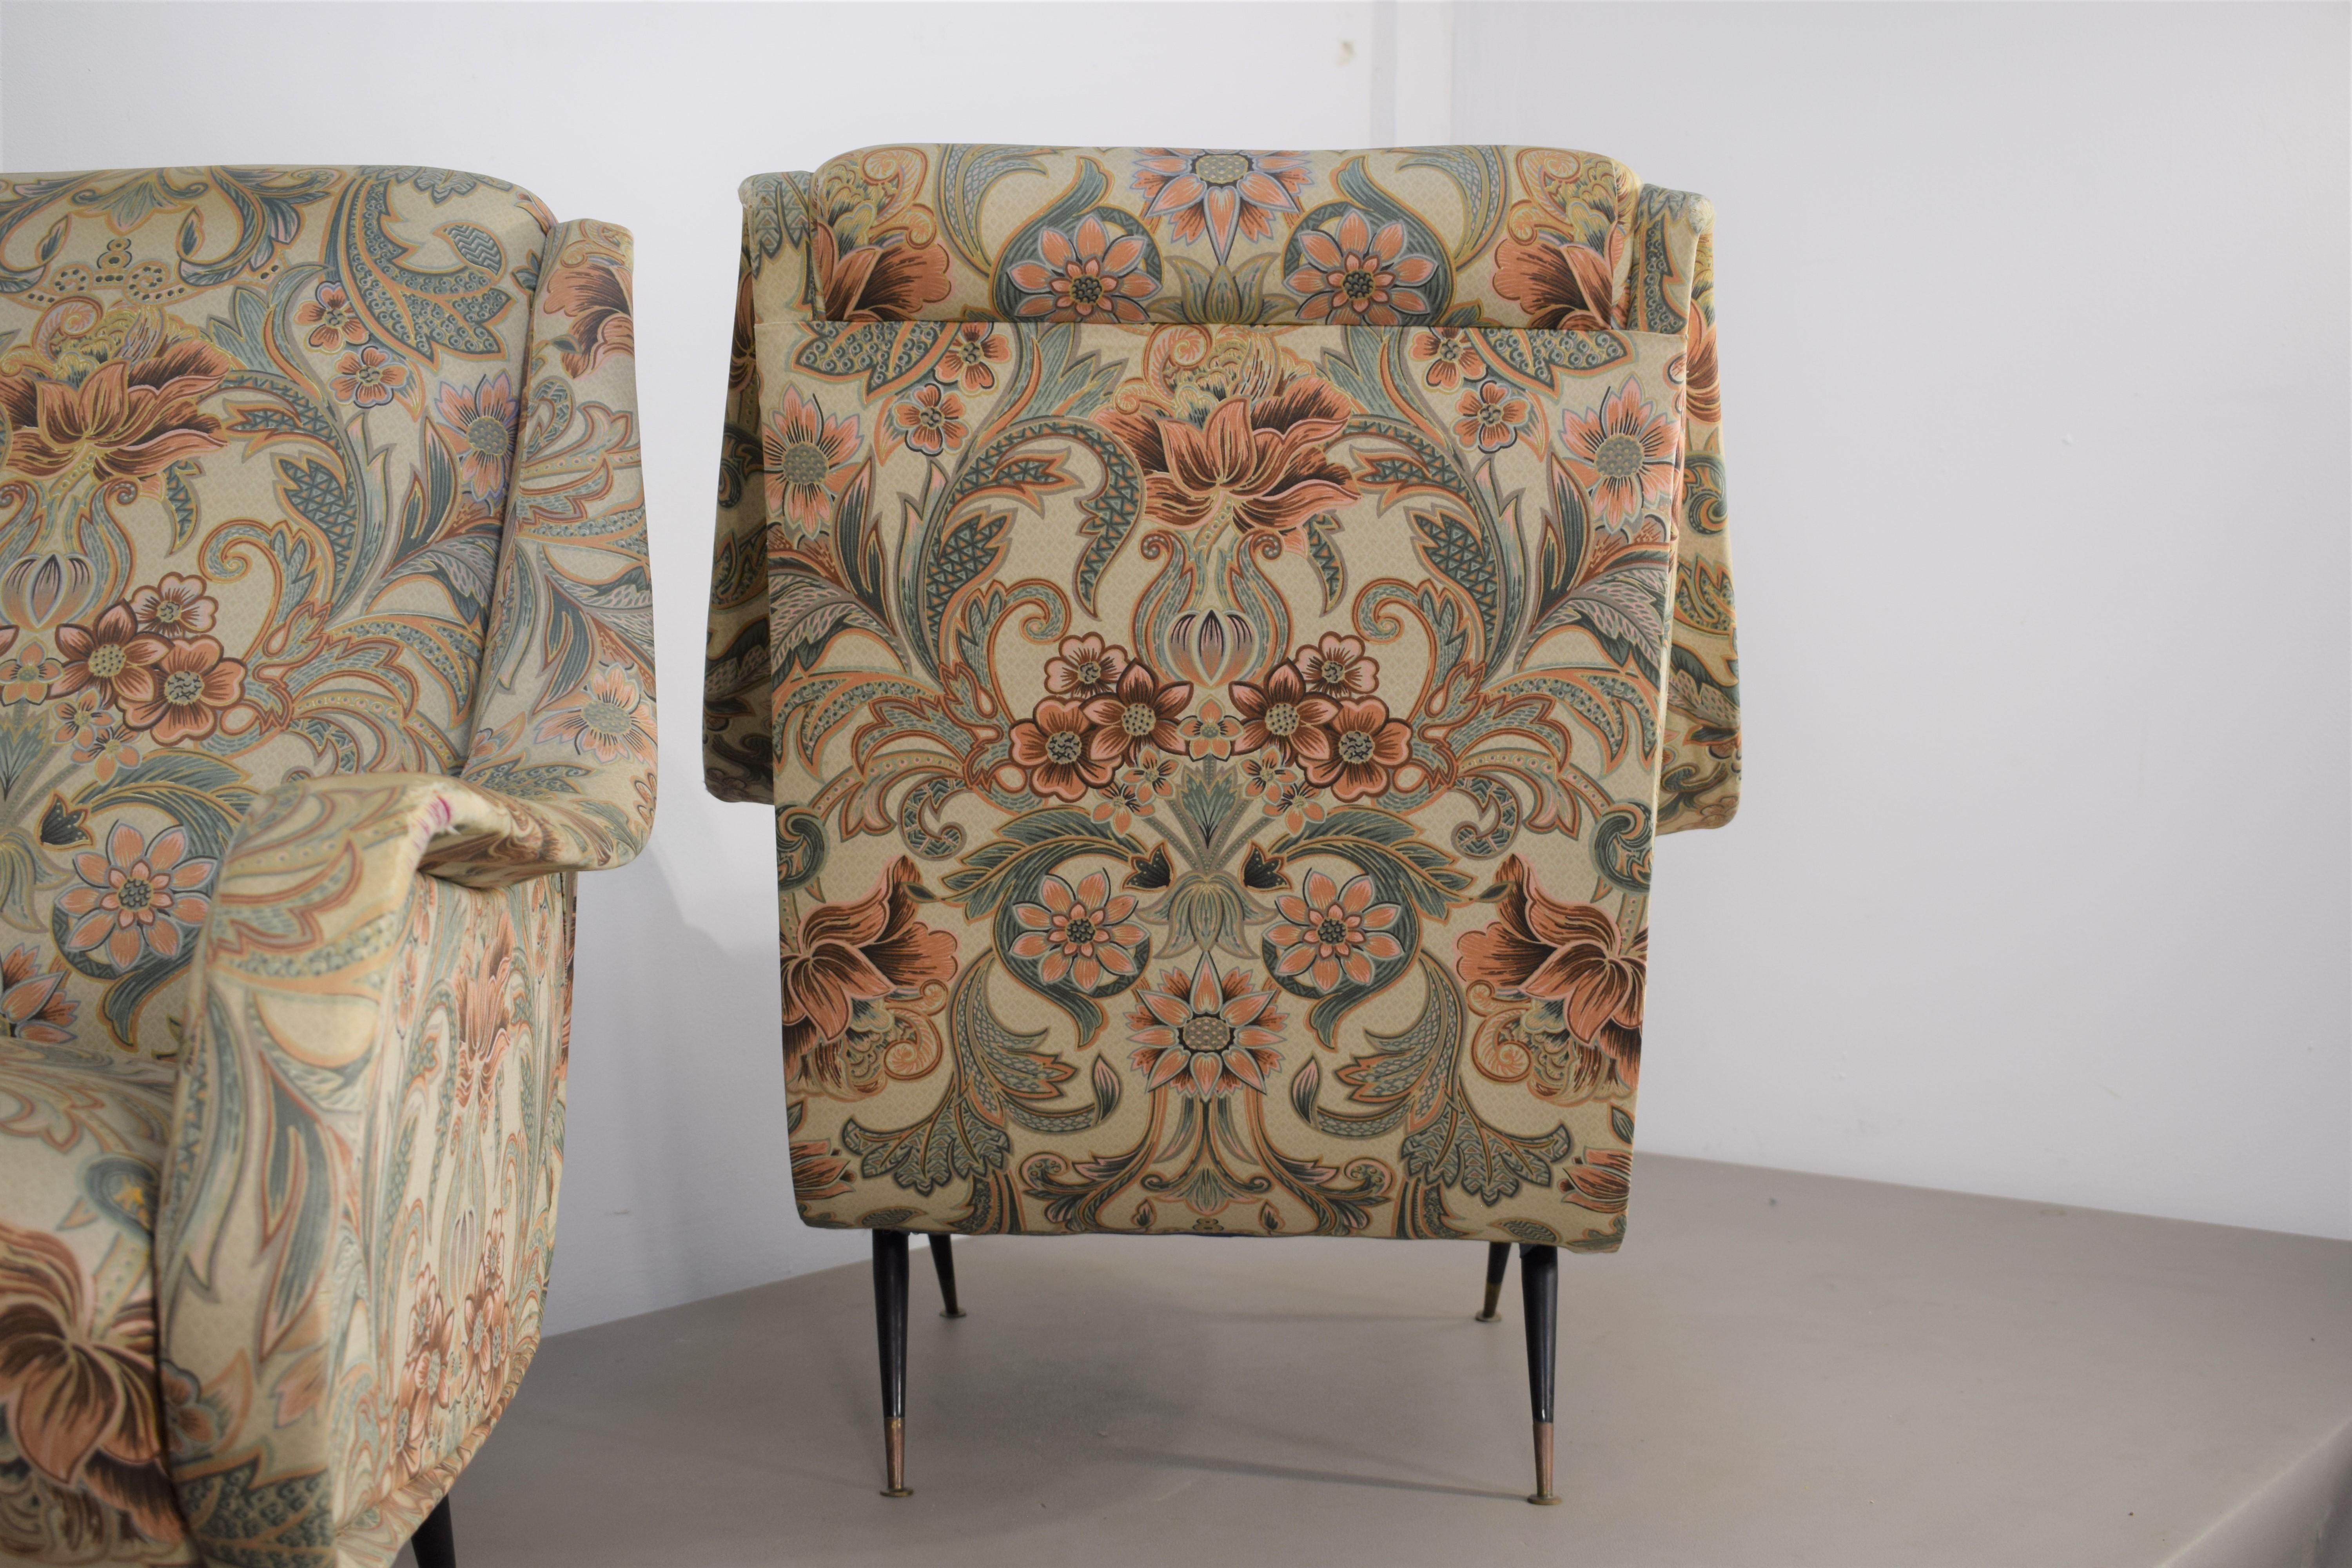 Metal Pair of Italian Armchairs by Aldo Morbelli for Isa, 1950s For Sale